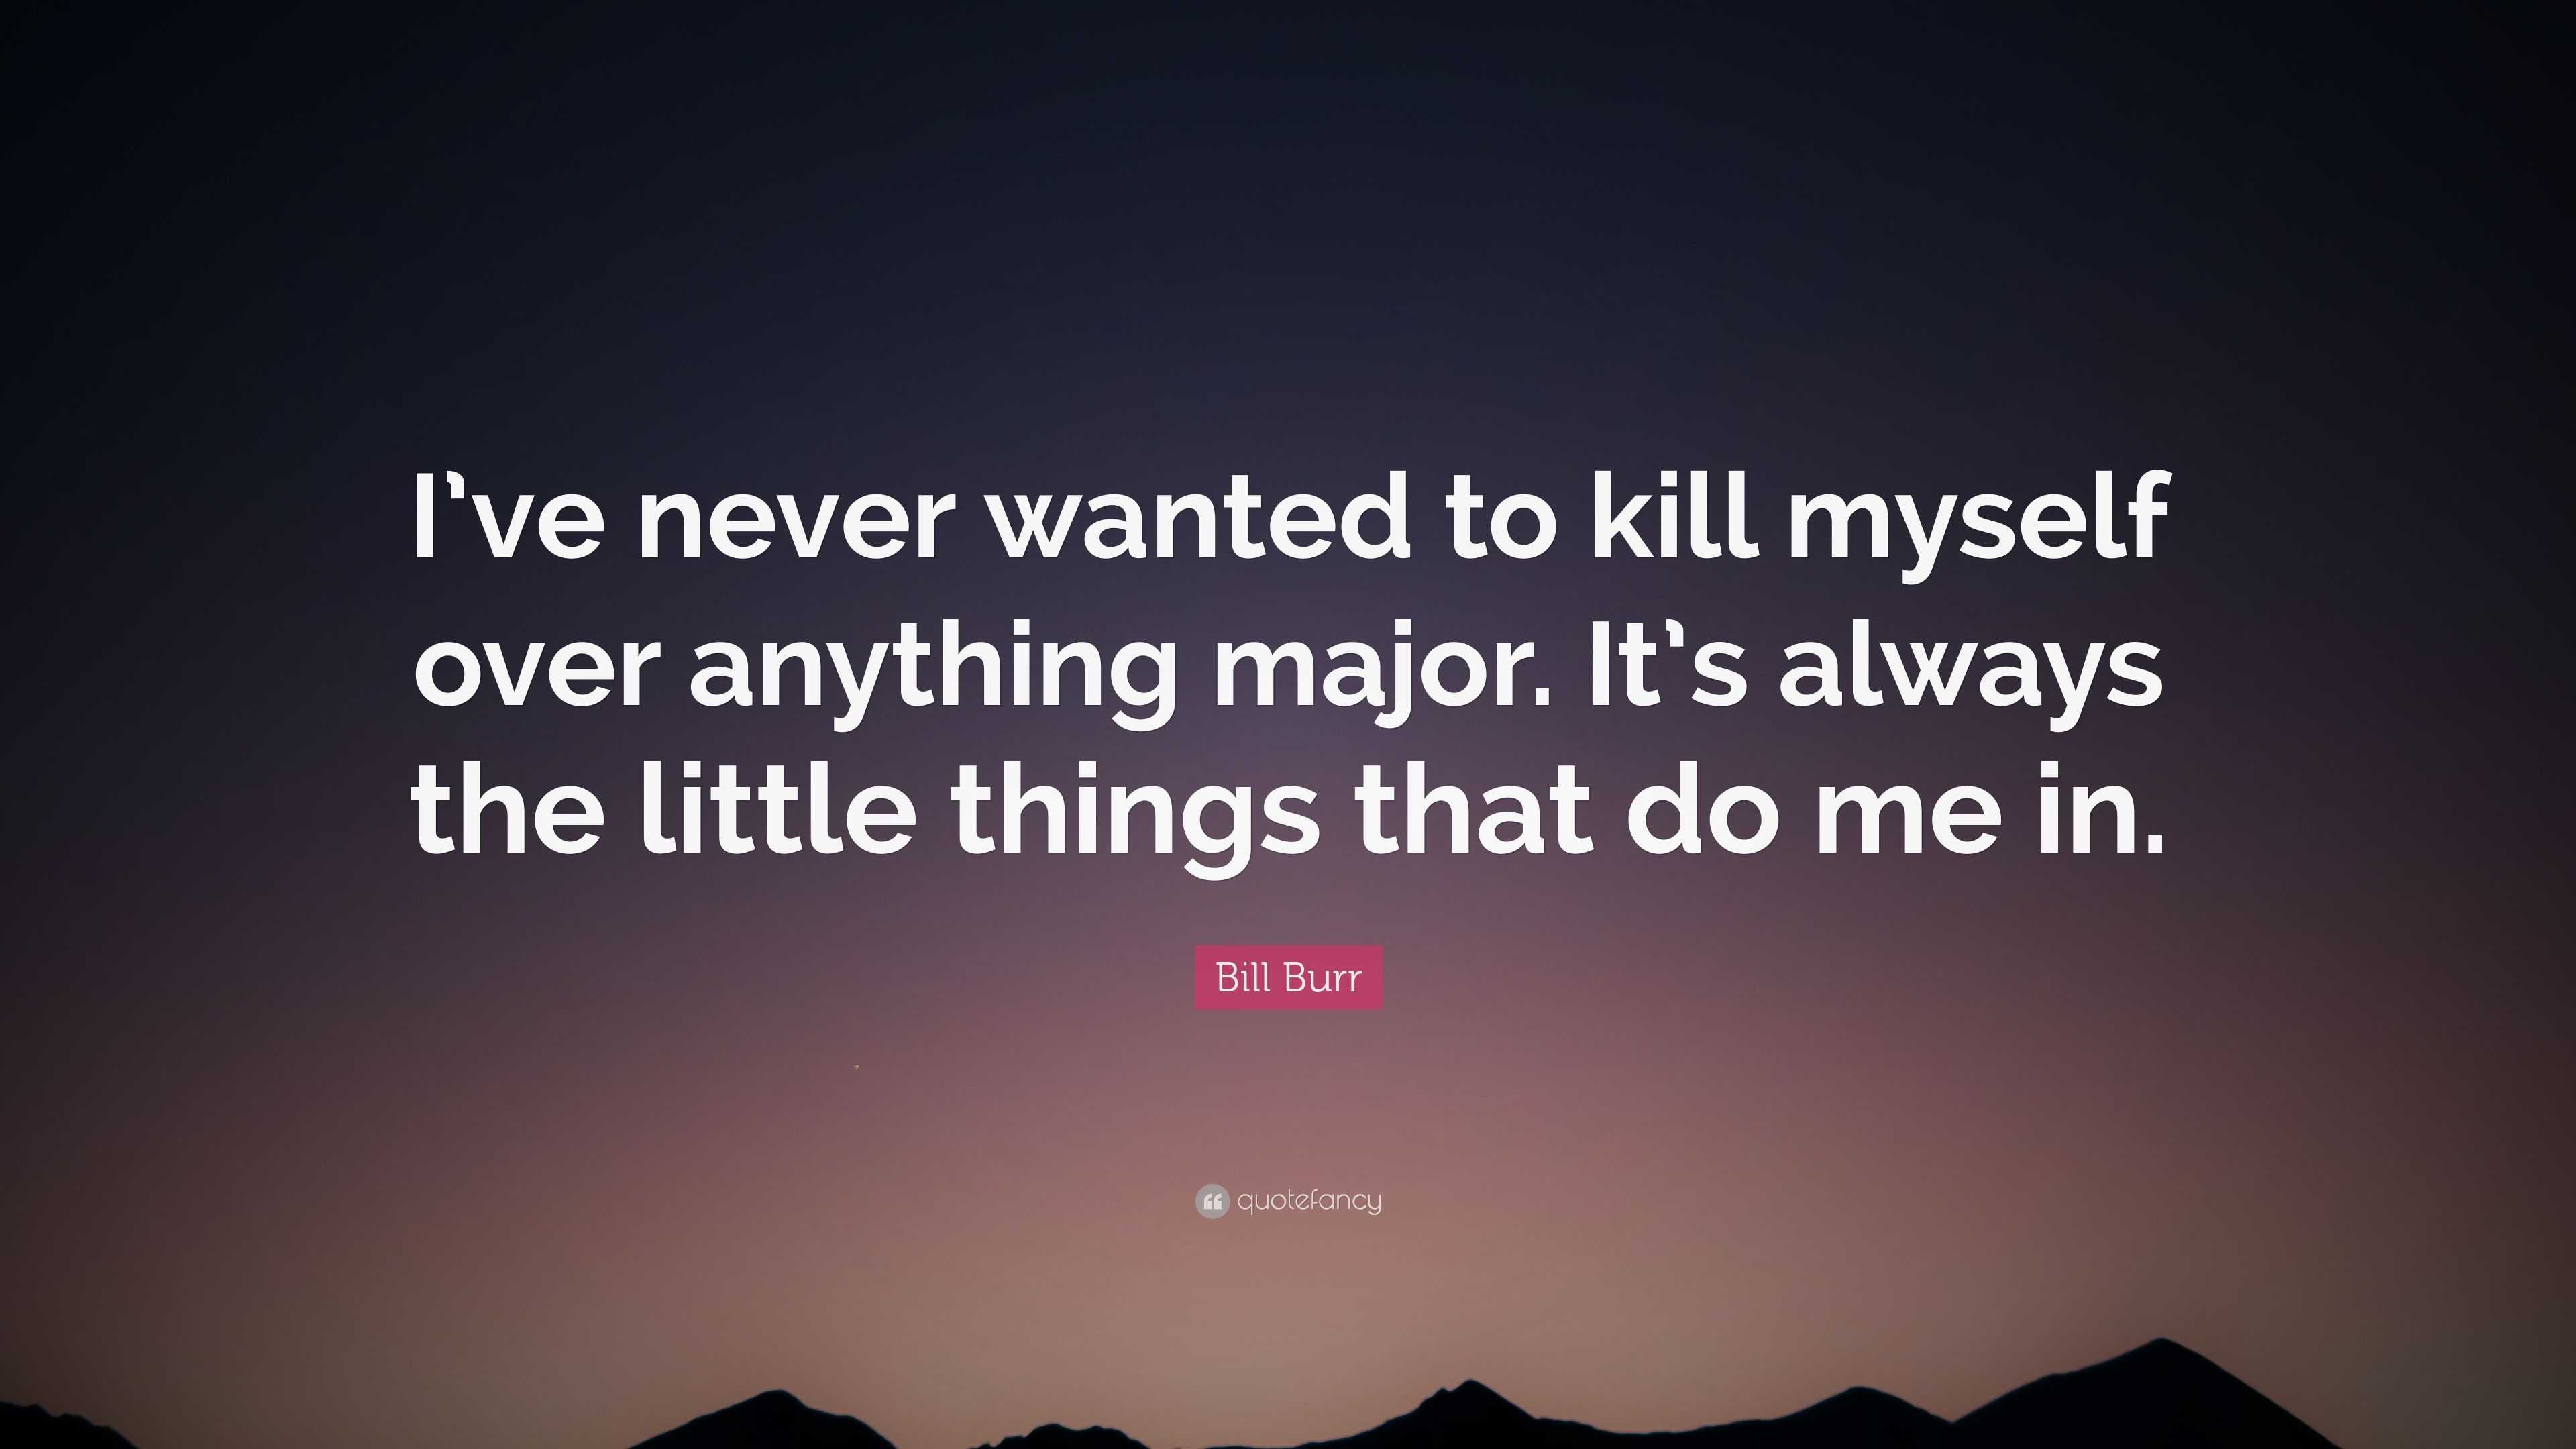 Bill Burr Quote: “I’ve never wanted to kill myself over anything major ...